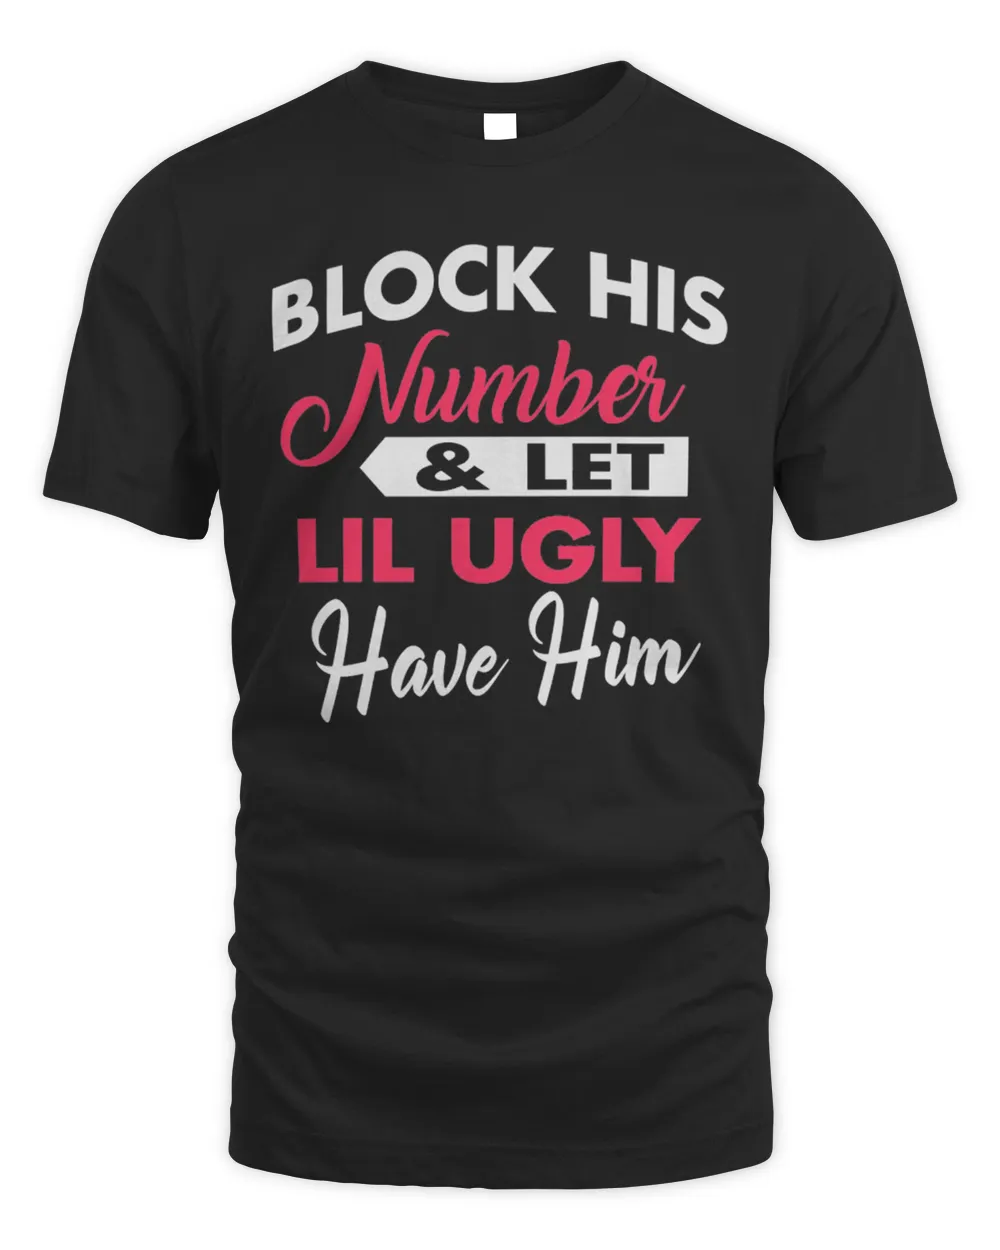 Block His Number And Let Lil Ugly Have Him Shirt Unisex Standard T-Shirt black xl